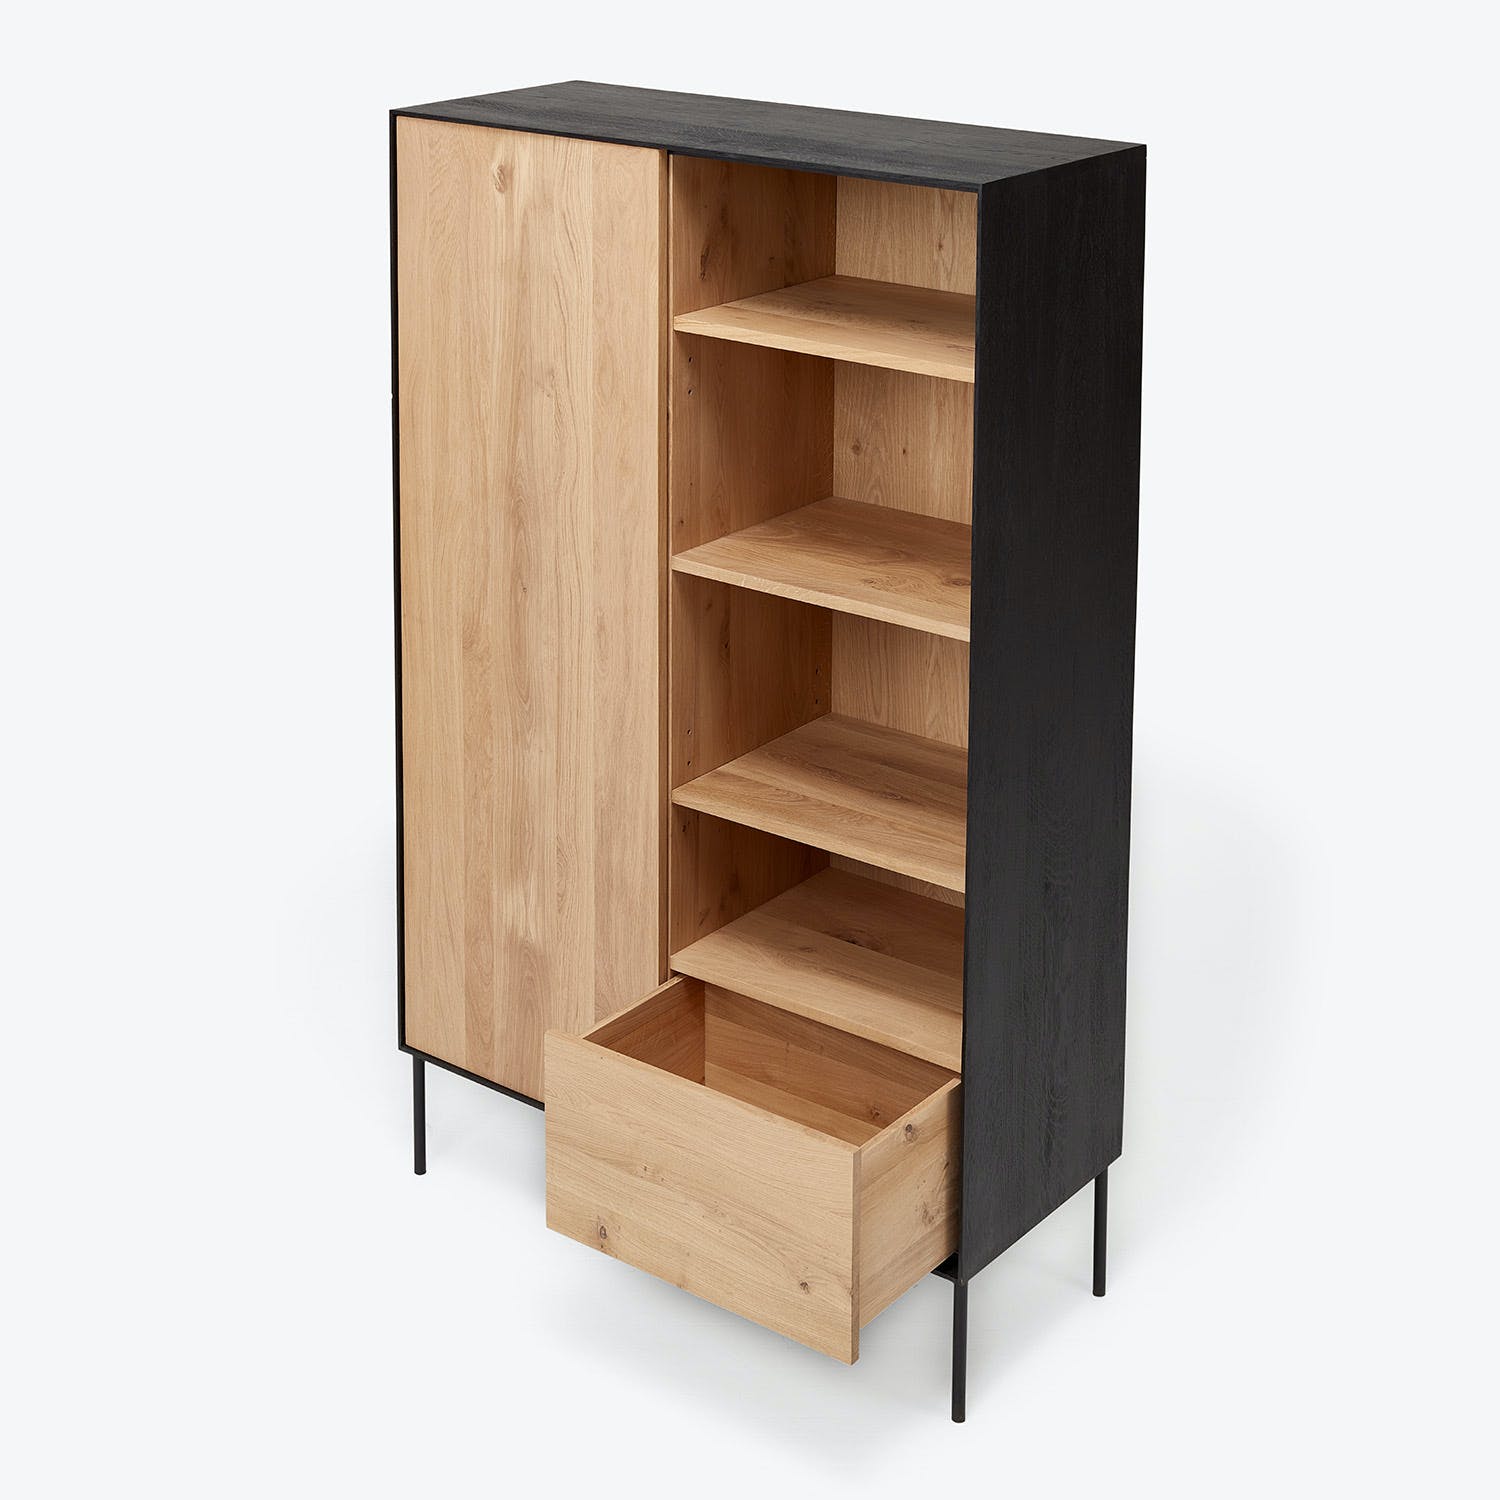 Modern wooden storage cabinet with two-tone design and sleek legs.